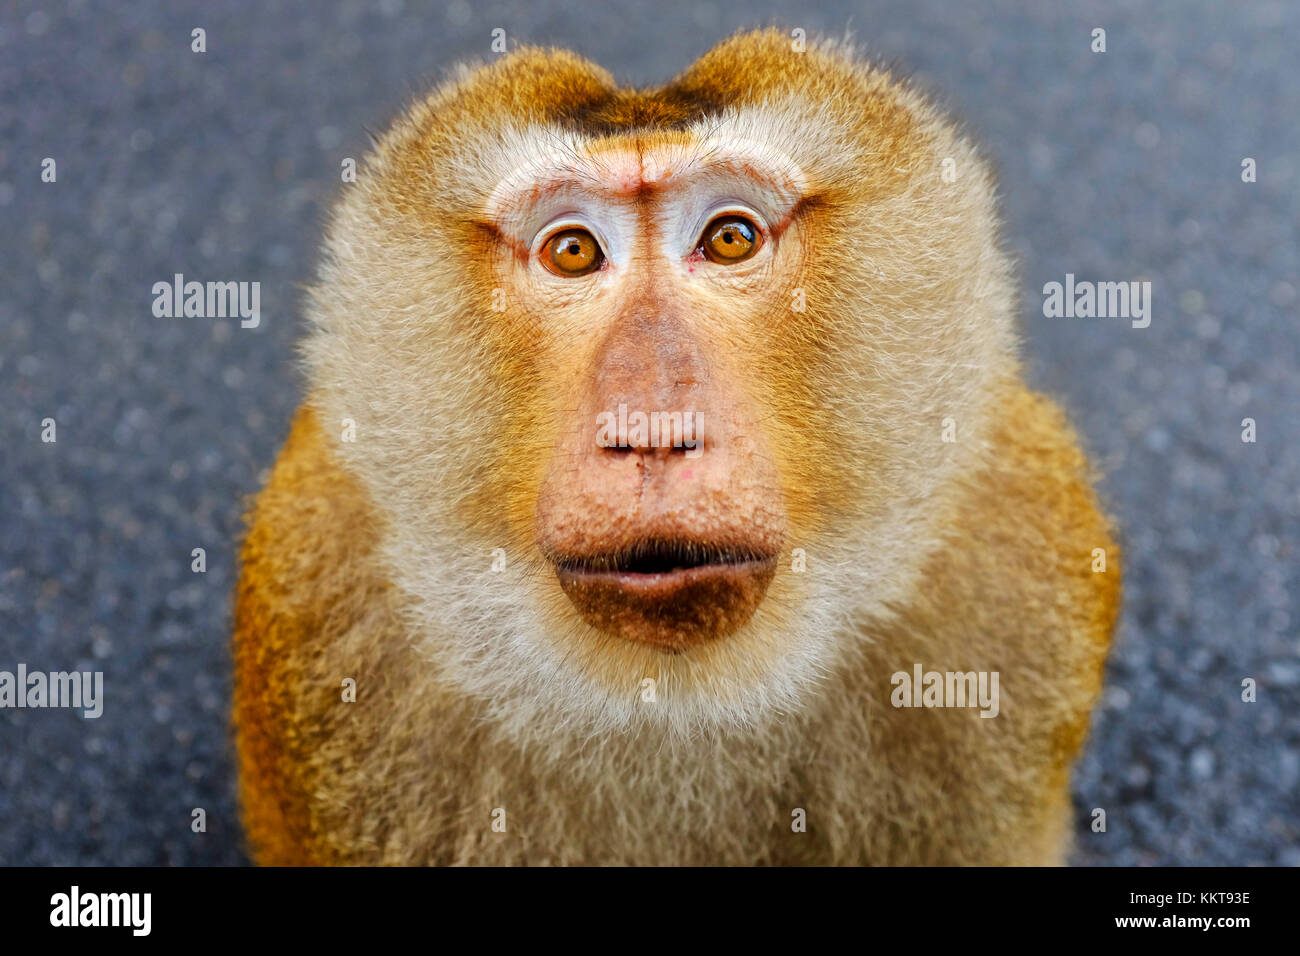 Southern pig-tailed macaque in Khao Toe Sae, Phuket, Thailand Stock Photo